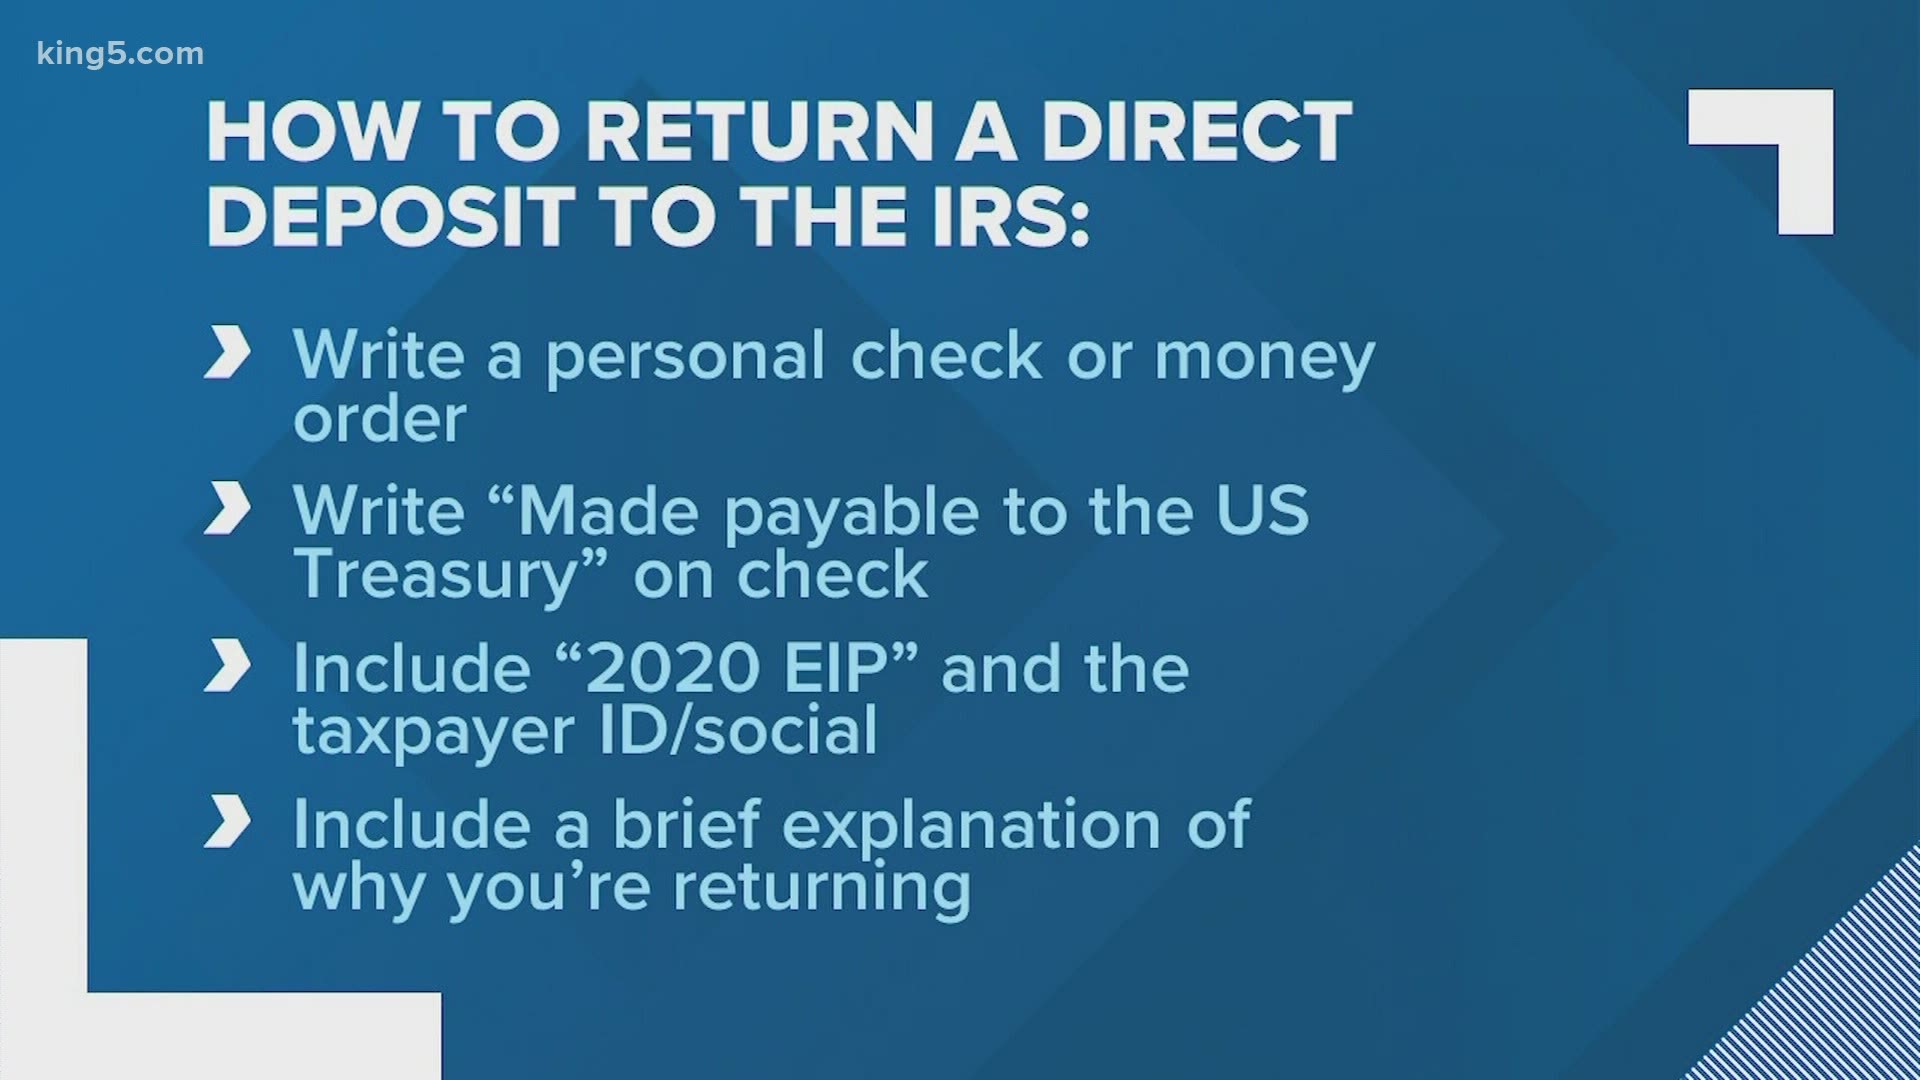 The IRS says stimulus money sent to dead people needs to be returned by mailing back paper checks or writing a personal check for direct deposit payments.